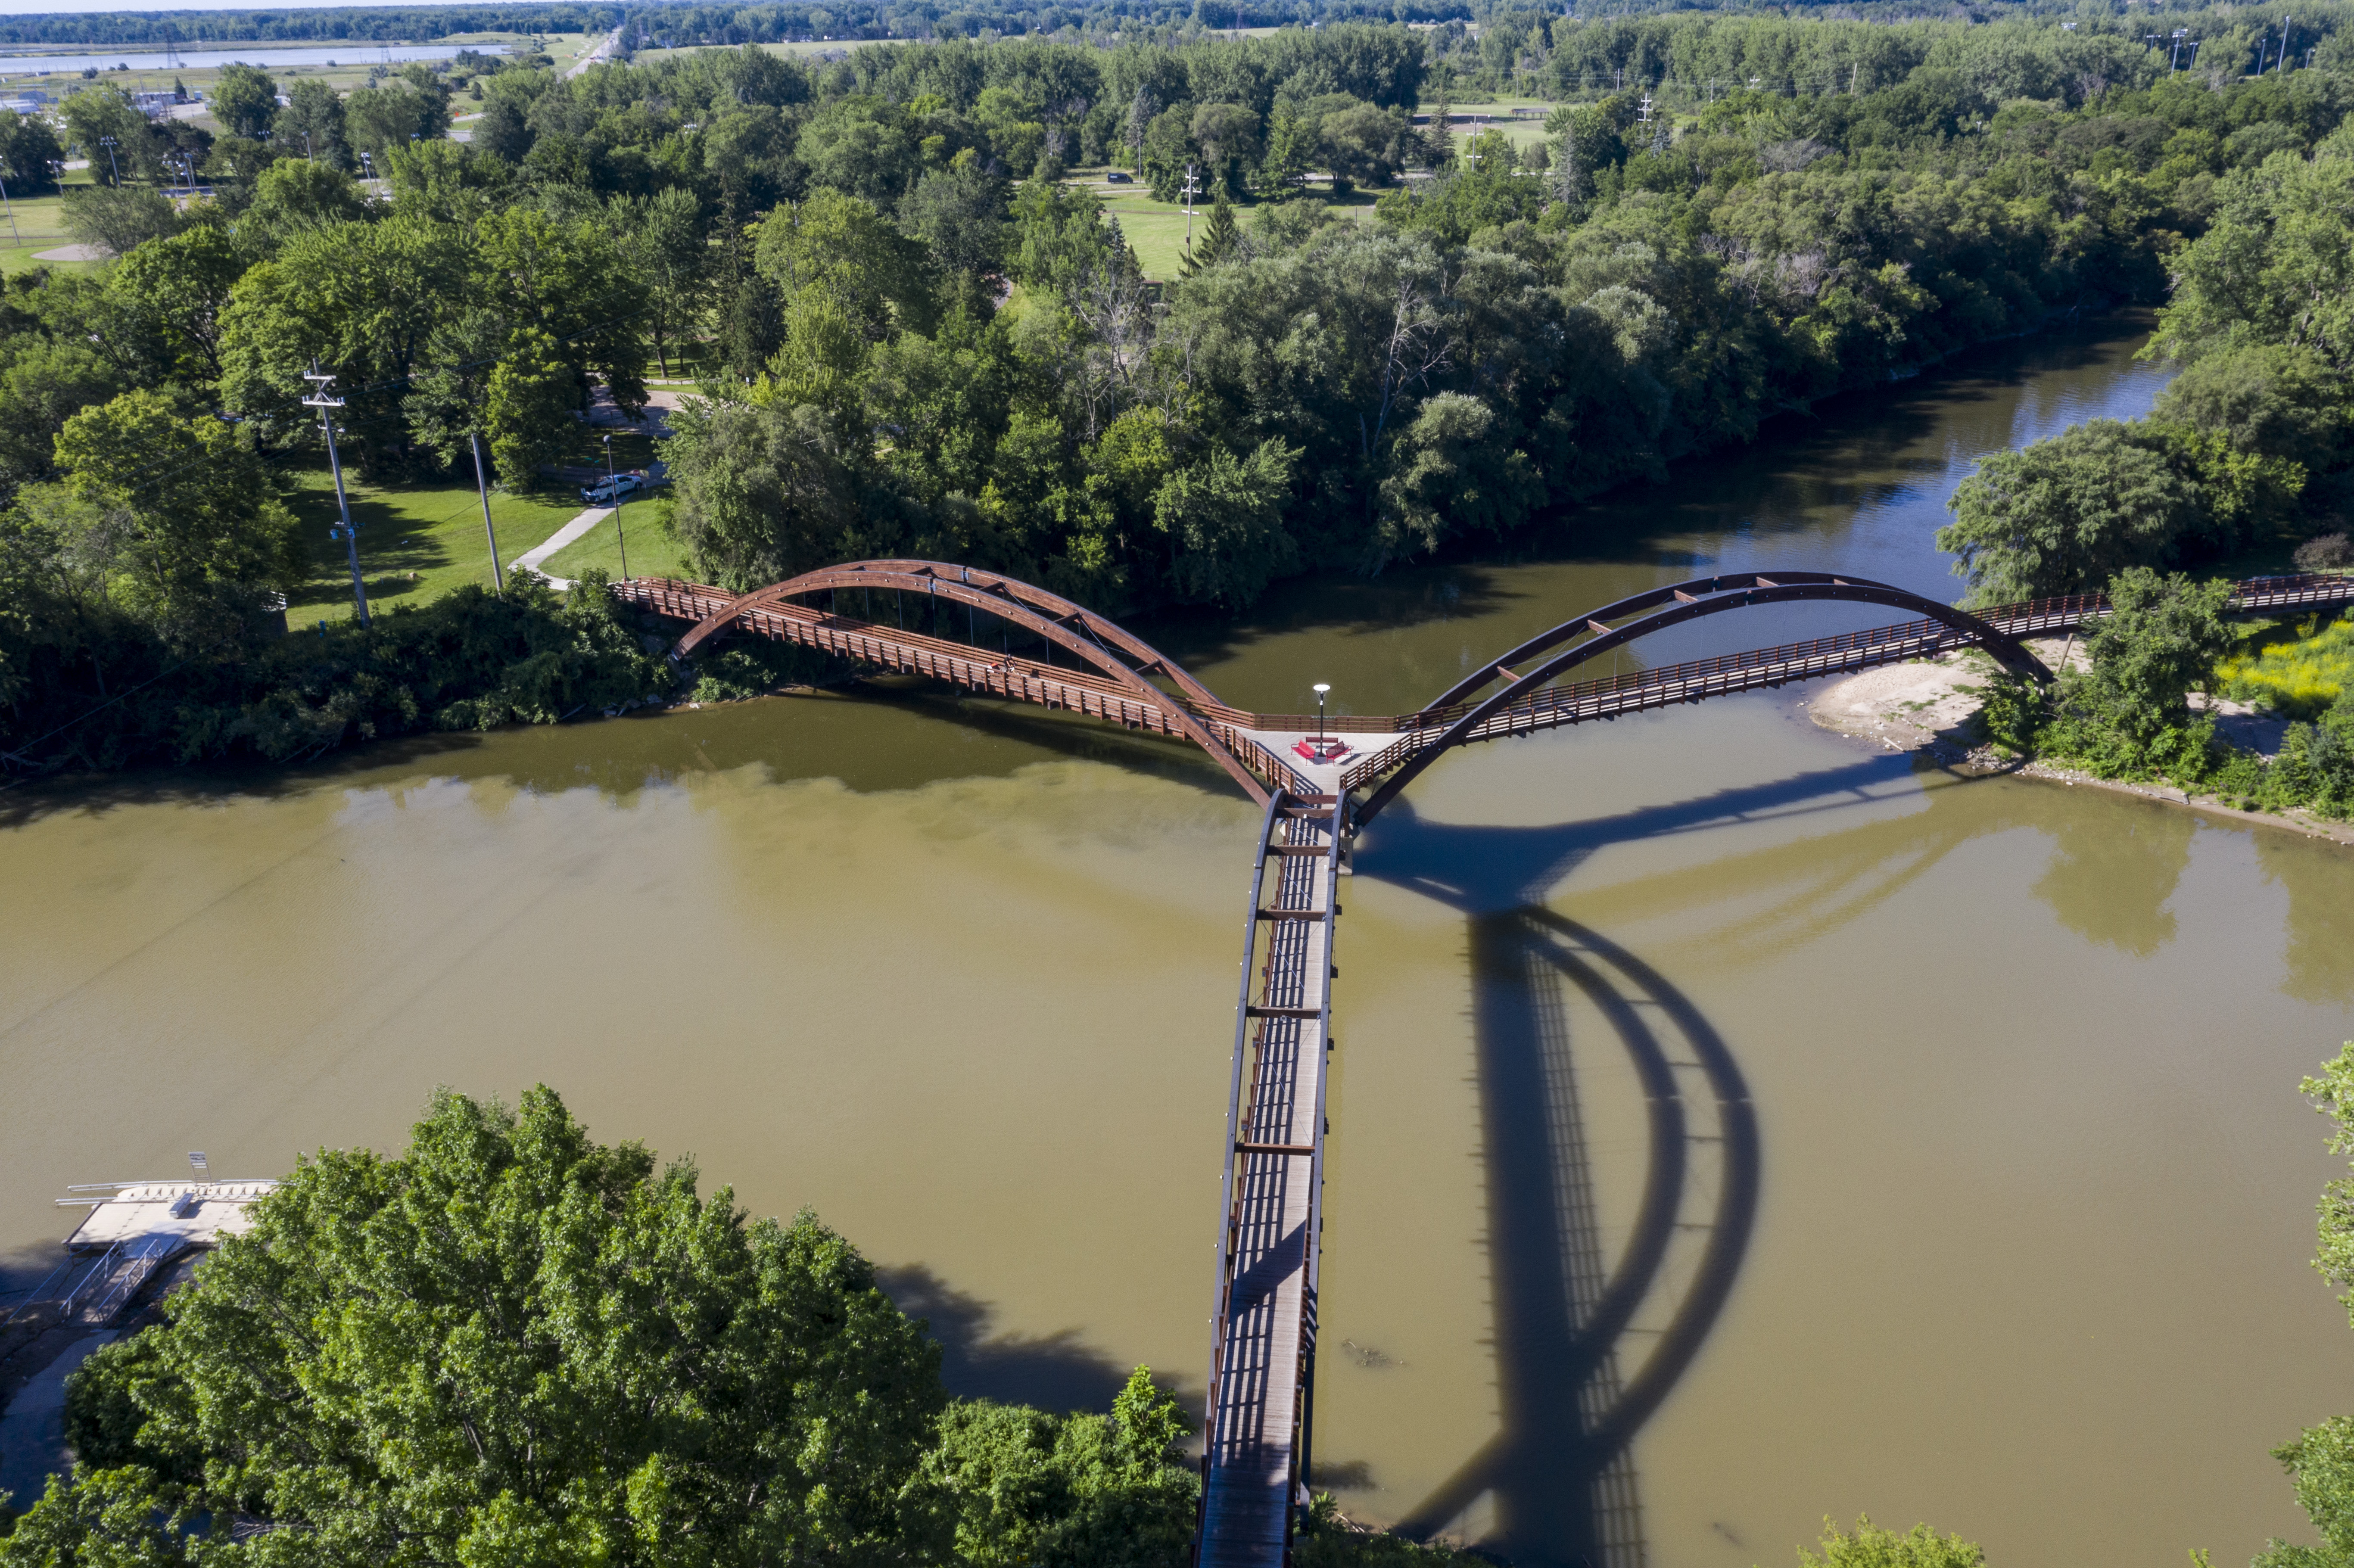 A view of the Tittabawasse River and the Tridge in Midland on Thursday, July 30, 2020. The devastating flood in May gushed over the majority of land in this area. (Kaytie Boomer | MLive.com)